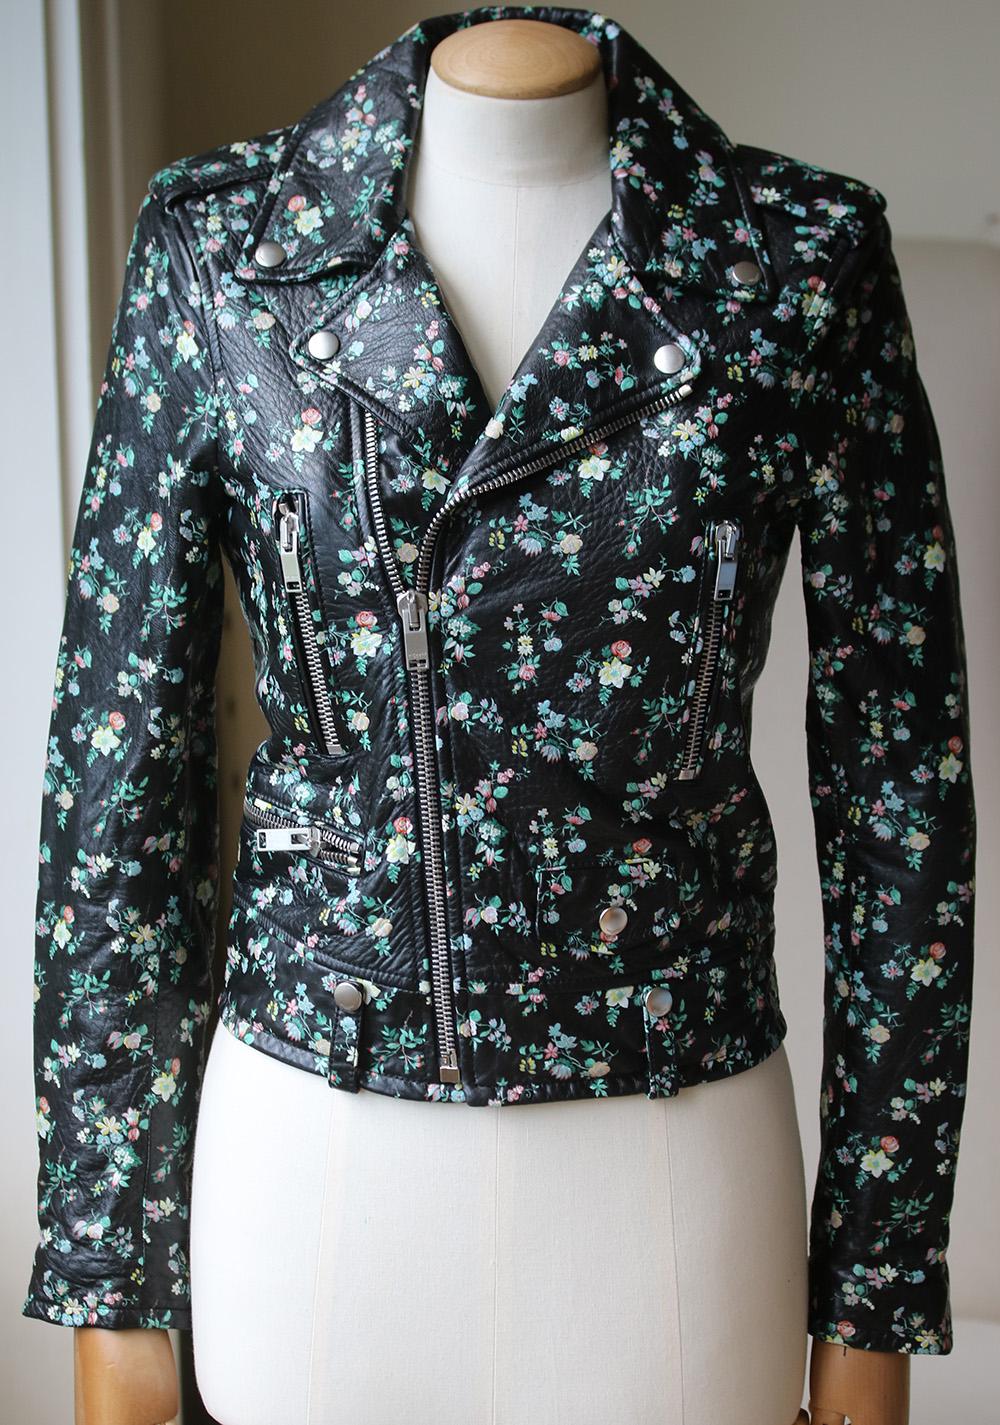 Saint Laurent floral leather biker jacket. Textured leather. Single-breasted. Lapel collar. Fully lined. 100% Lambskin. Made in Italy.

Size: FR 34 (UK 6, US 2, IT 38)

Condition: As new condition, no sign of wear.